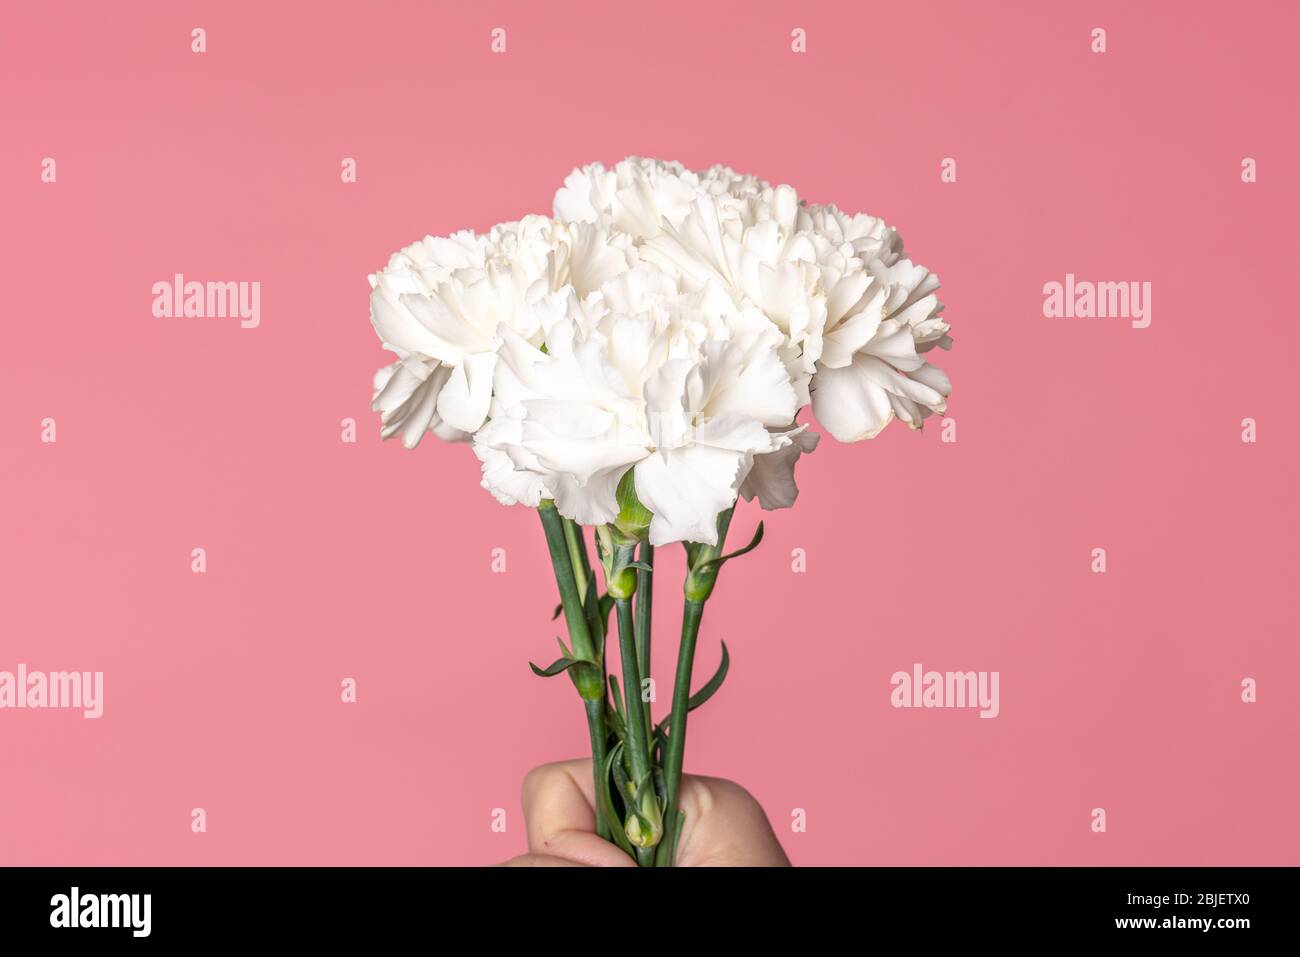 White carnation flowers Dianthus caryophyllus also known as Clove isolated on candy pink Stock Photo